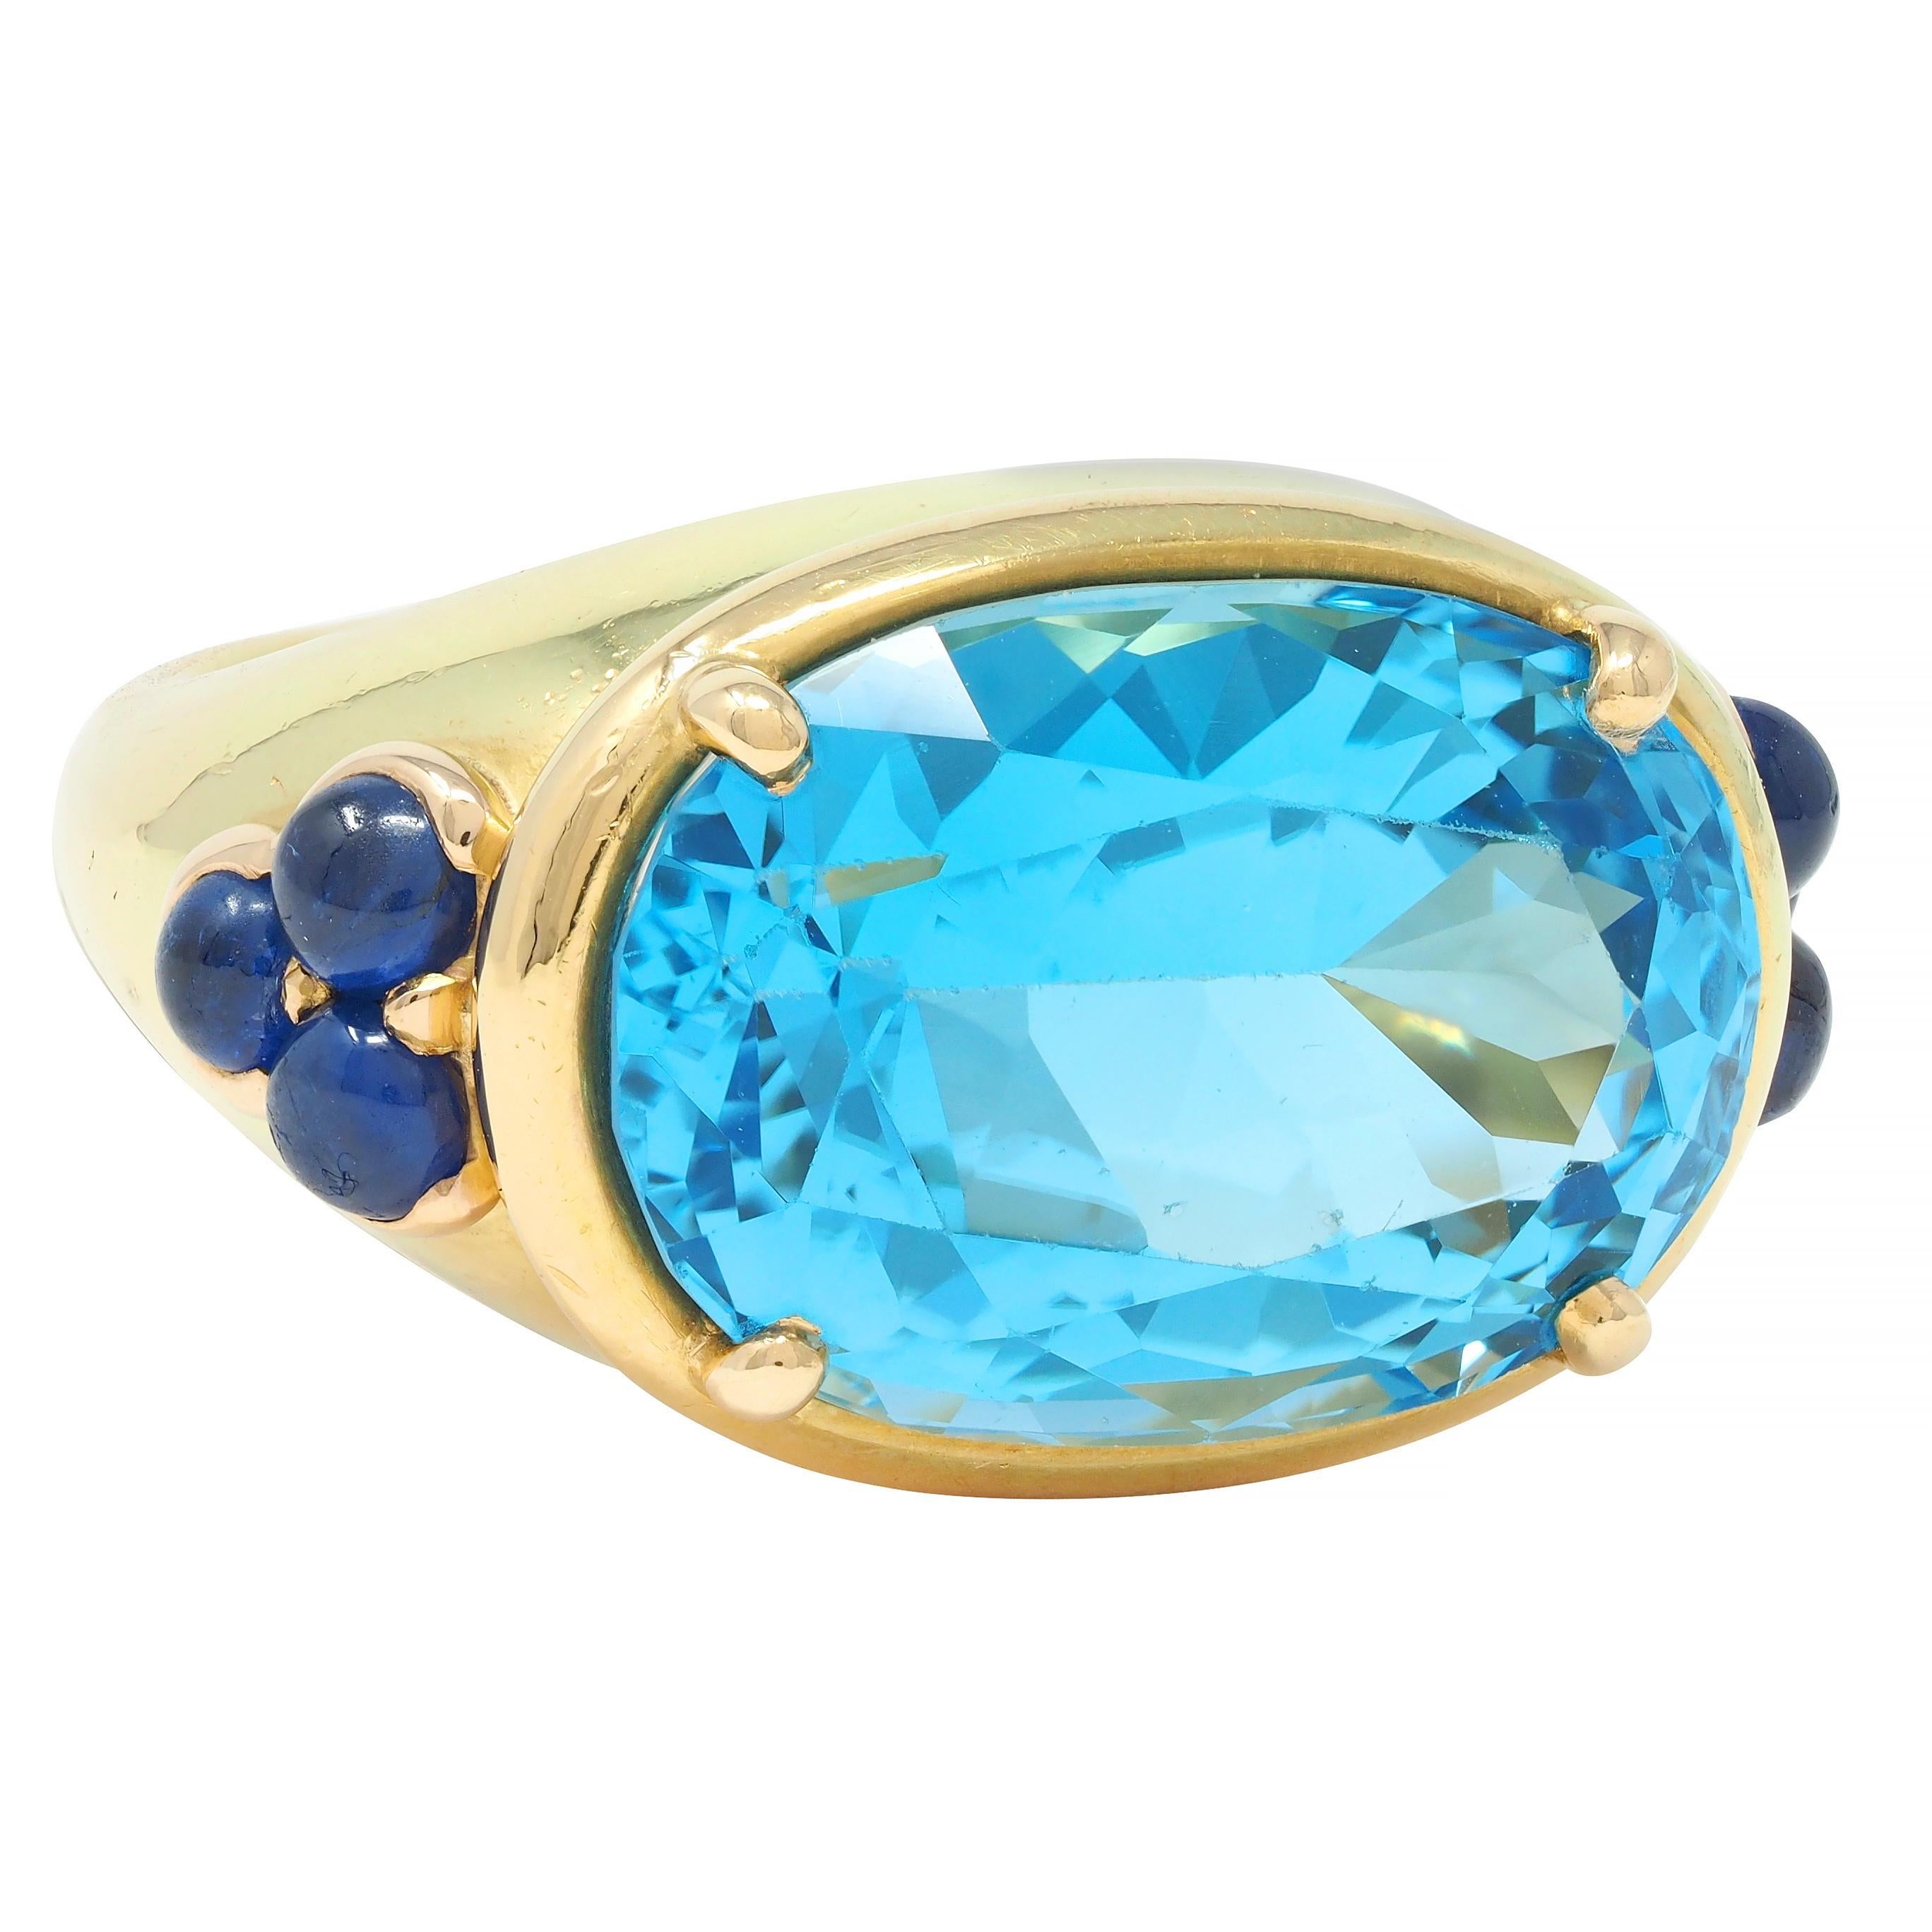 Centering an oval cut topaz weighing approximately 11.01 carats 
Transparent bright medium blue and  prong set east to west
With fluted surround flanked by clusters of bezel set sapphires
Round cabochons weighing approximately 1.04 carats